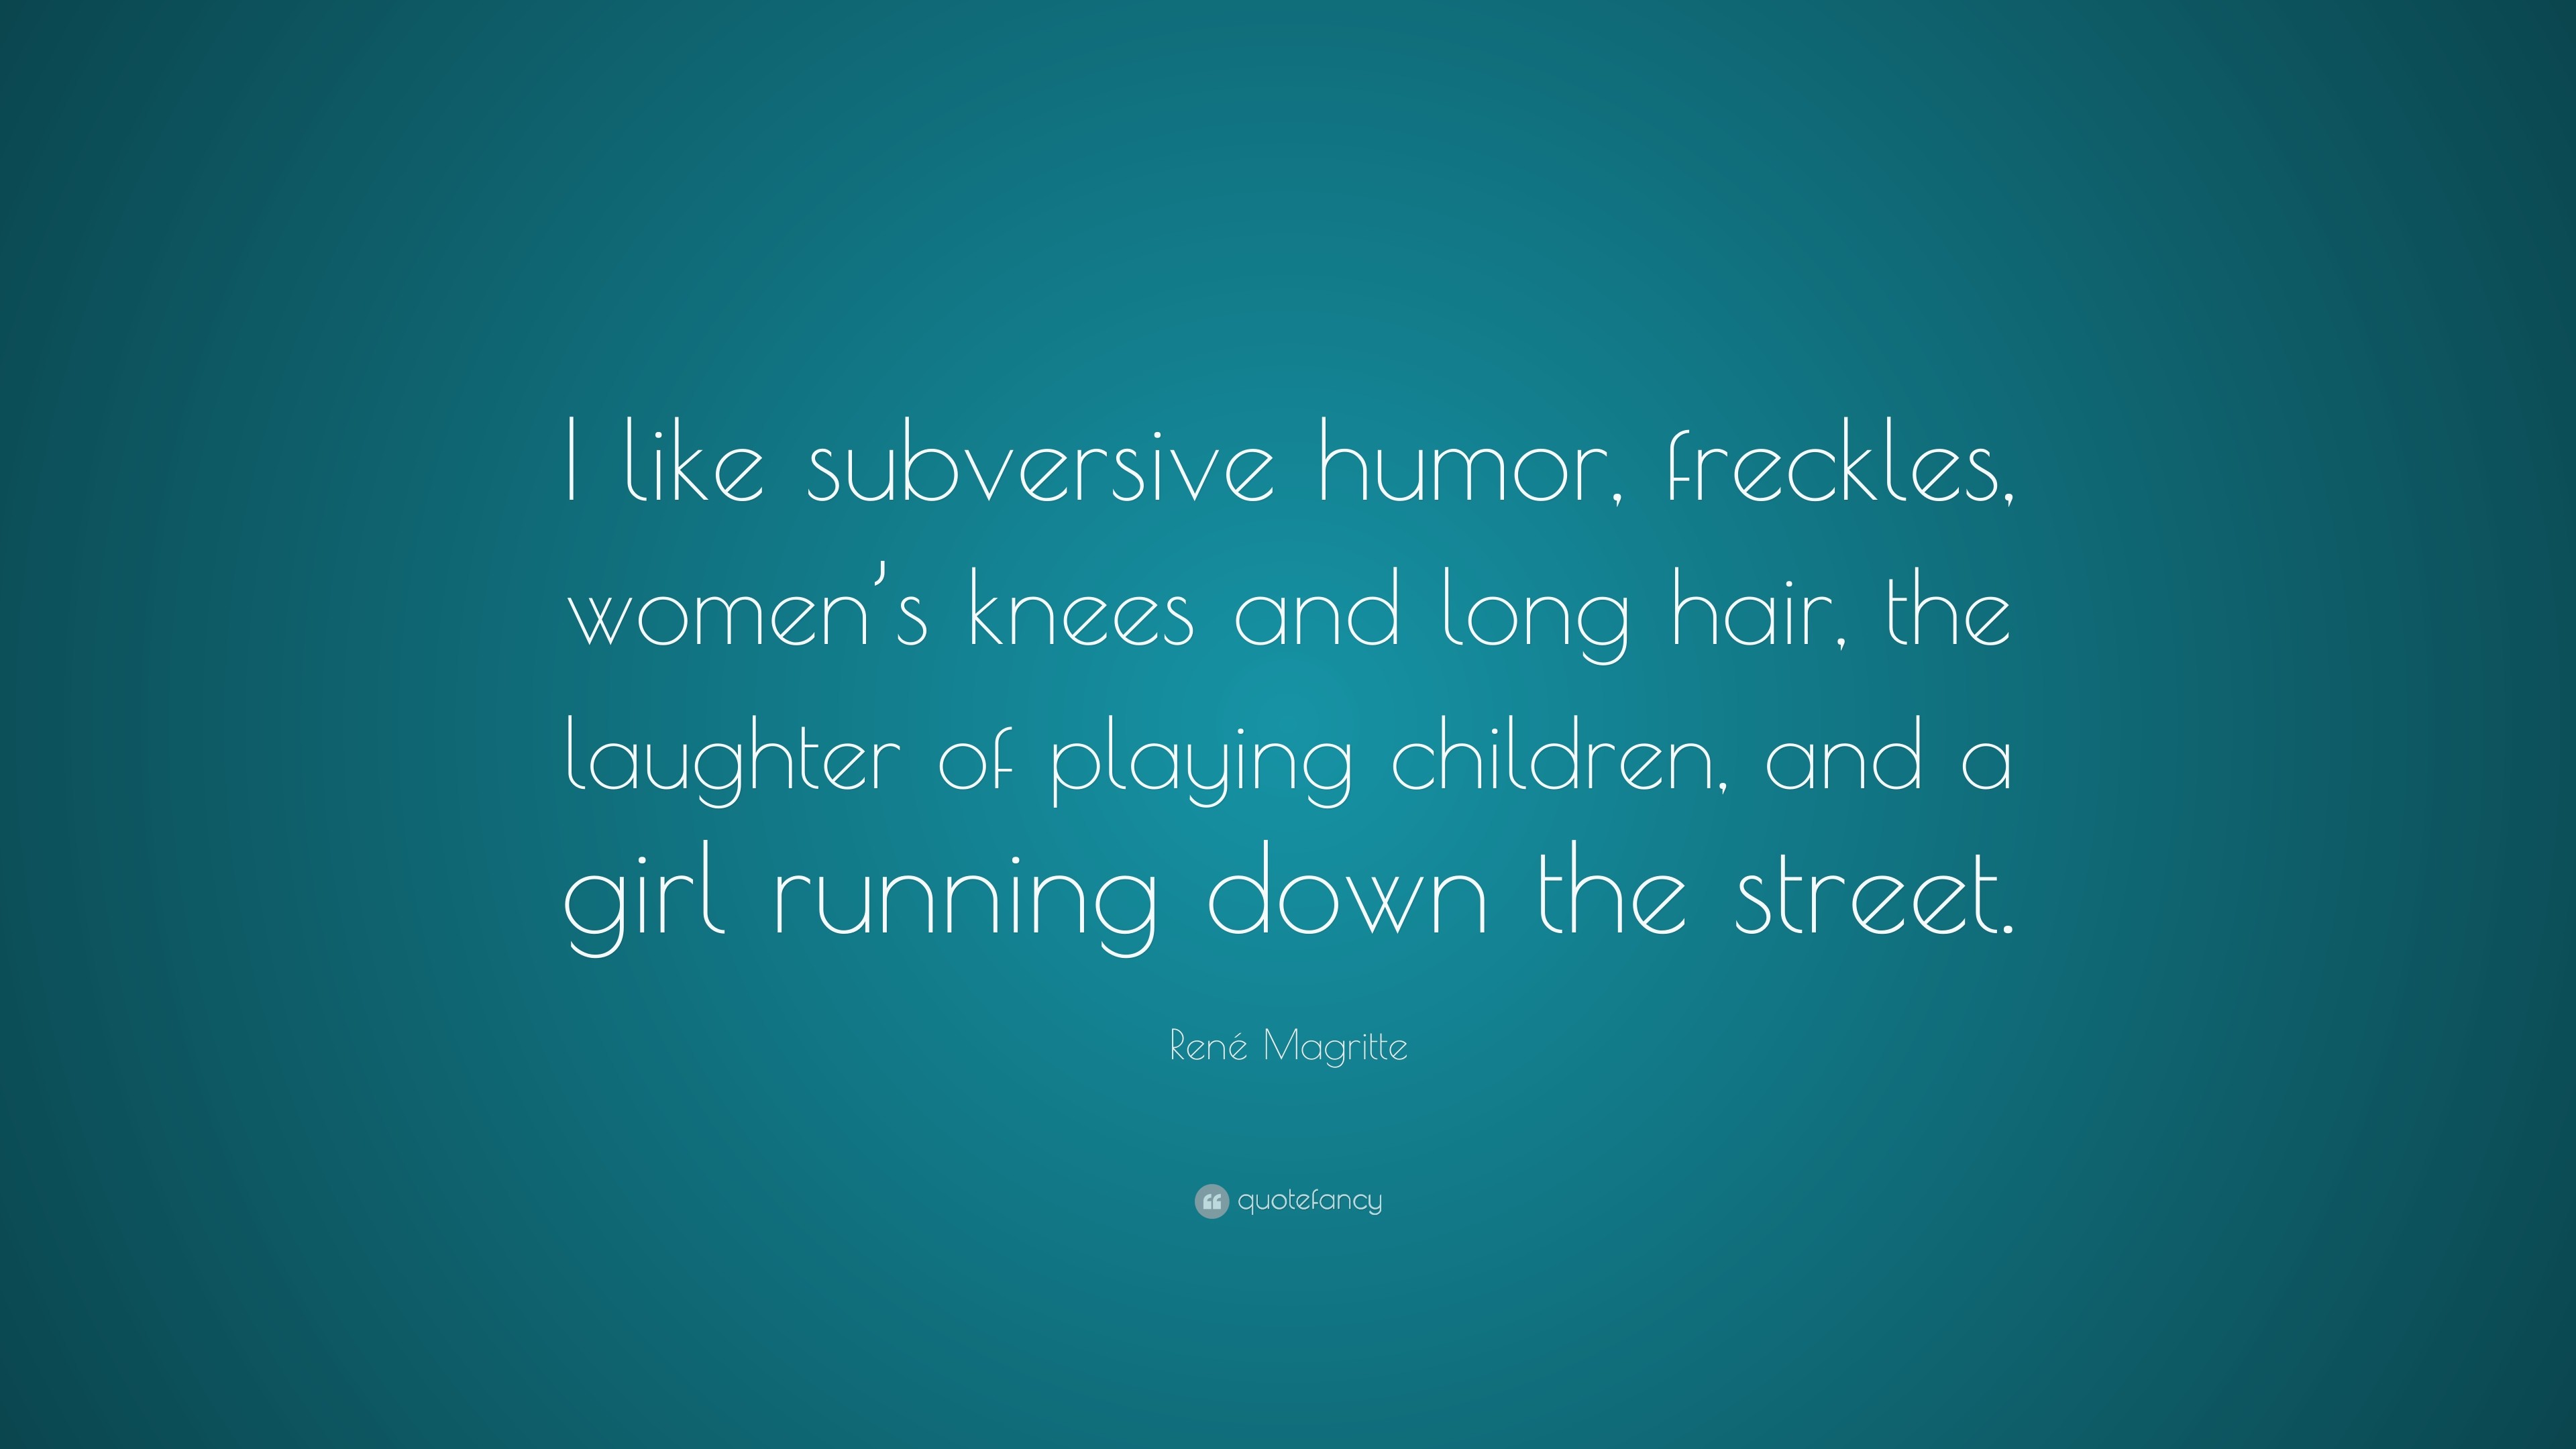 3840x2160 RenÃ© Magritte Quote: “I like subversive humor, freckles, women's knees and  long